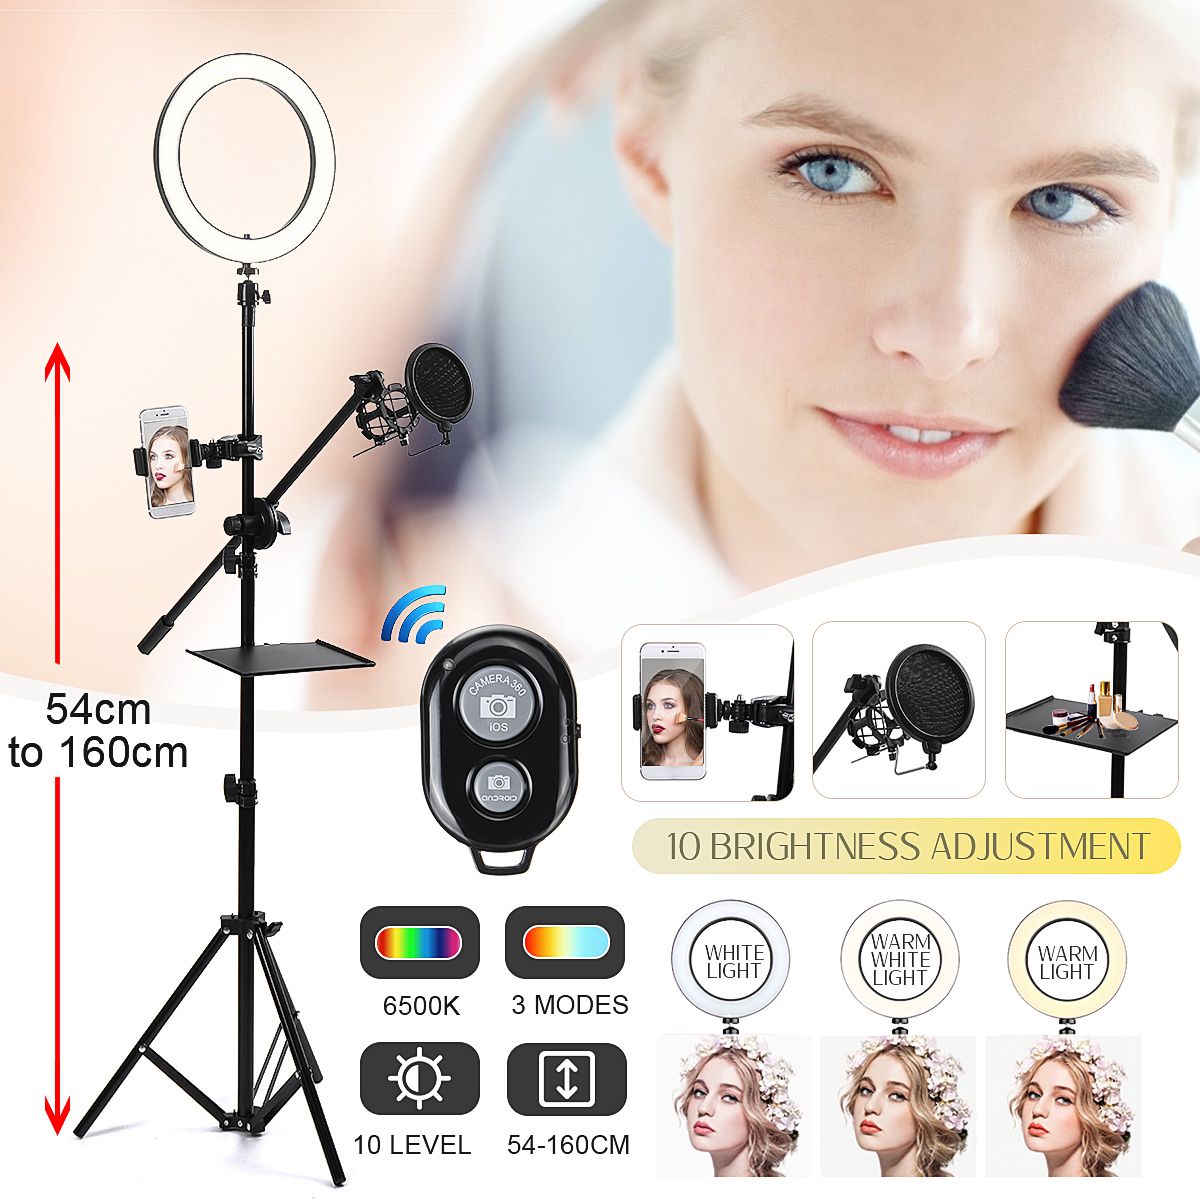 1625cm-Dimmable-LED-Video-Ring-Light-Tripod-Stand-with-PhoneMic-Holder-bluetooth-Selfie-Shutter-for--1610611